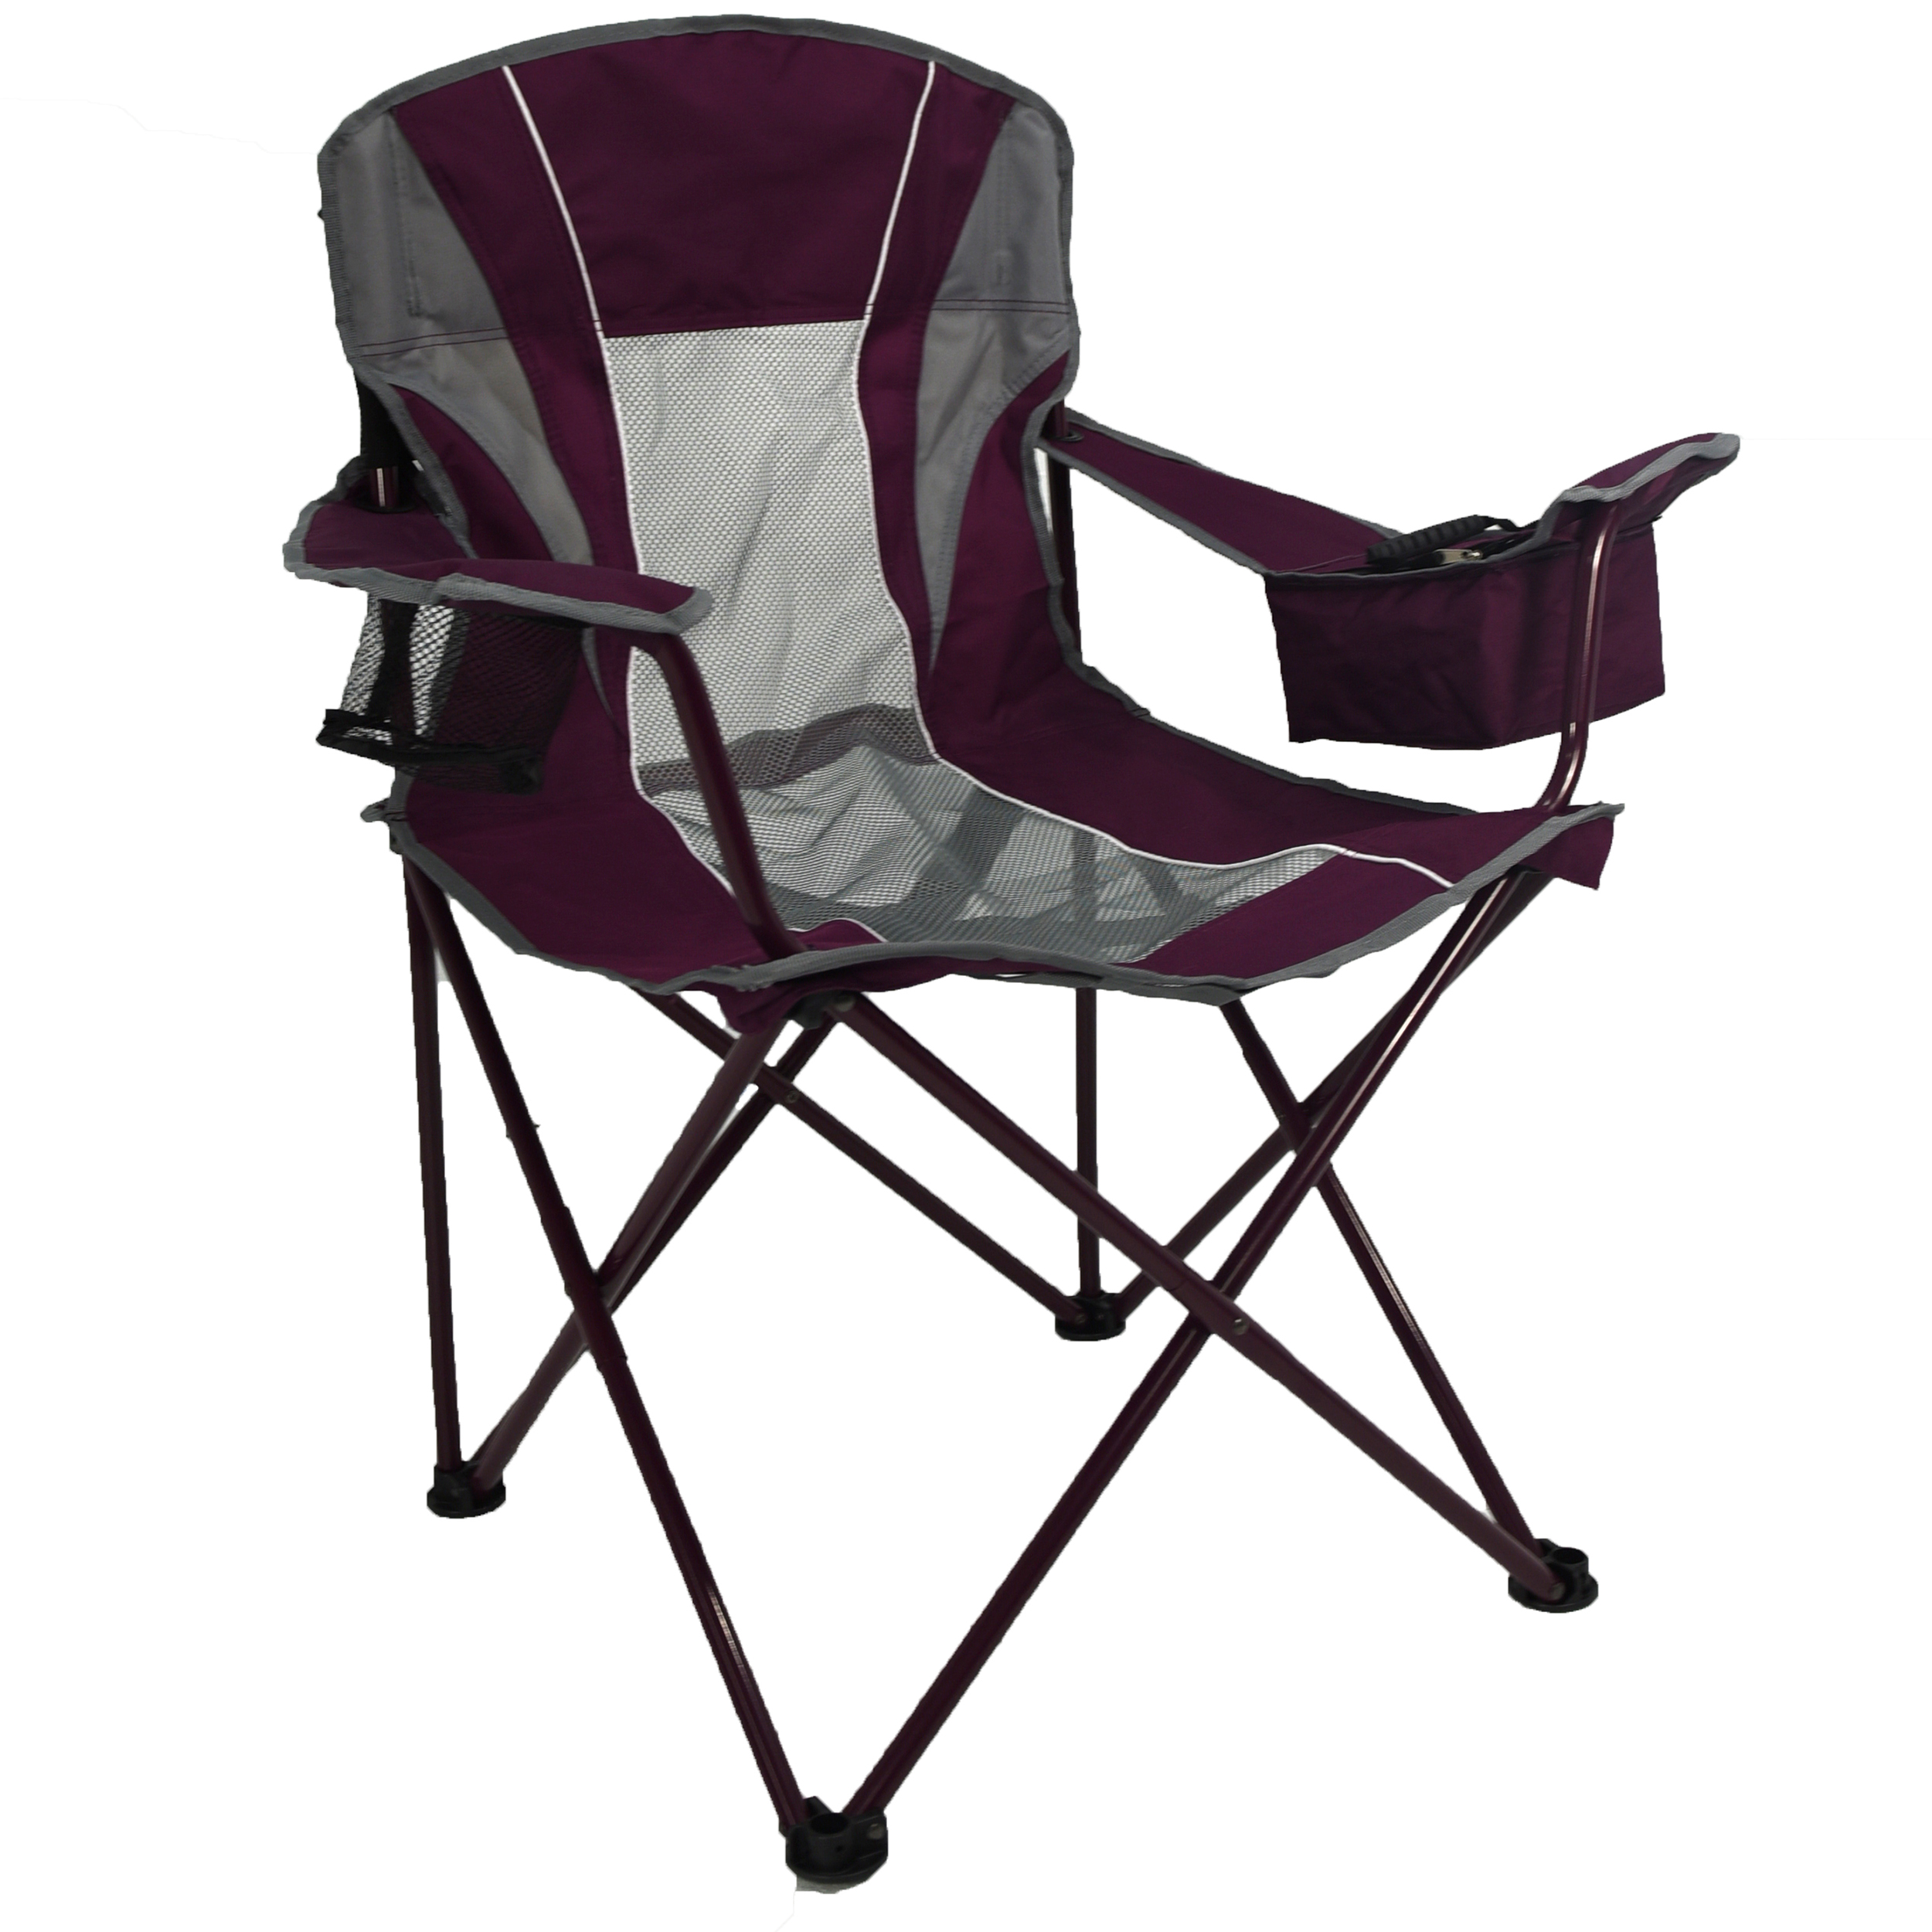 Ozark Trail Oversized Mesh Chair with Cooler, Purple, Adult - image 9 of 9